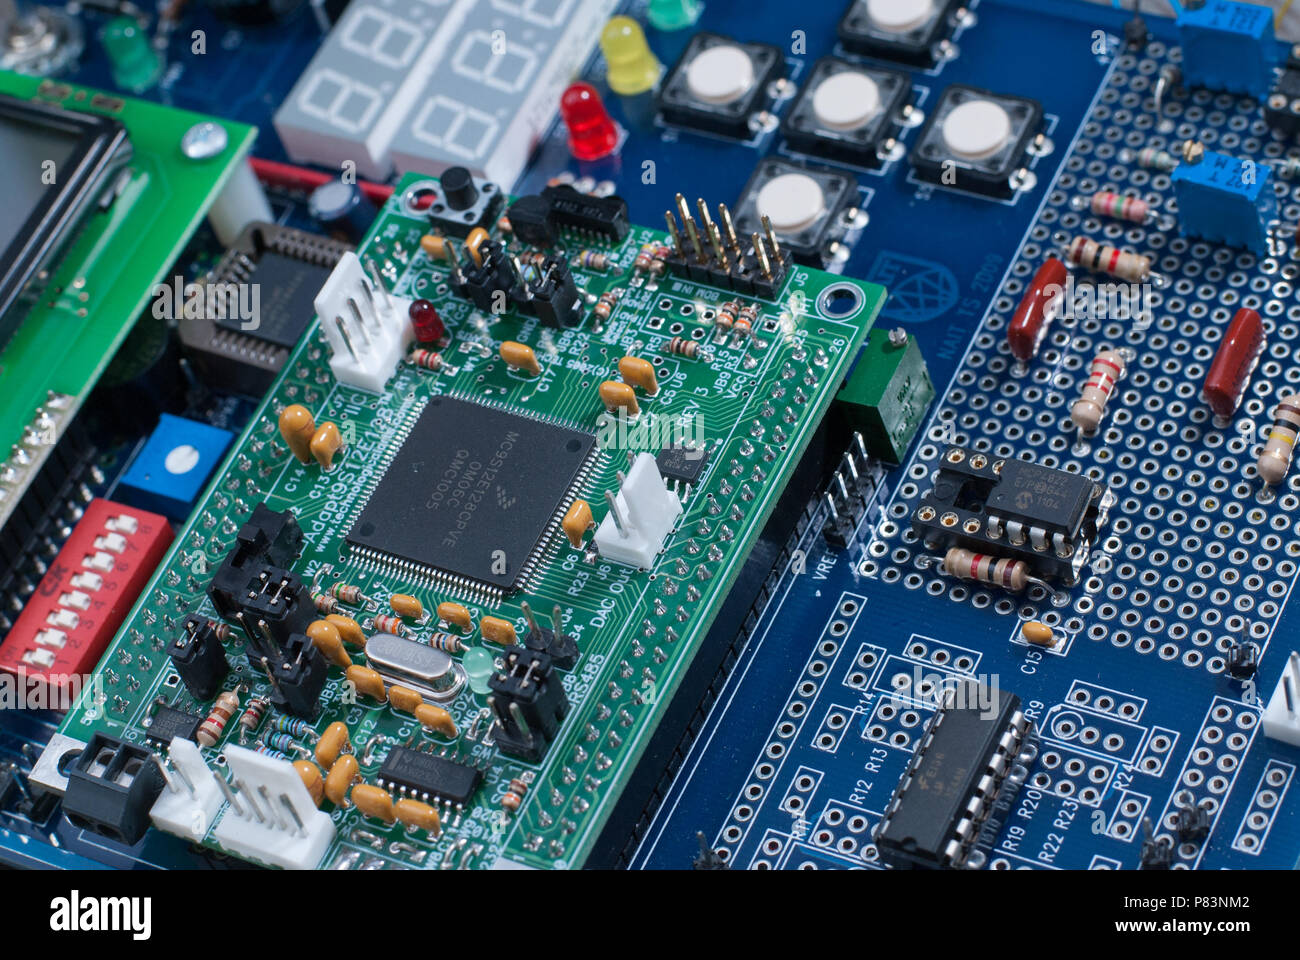 Close up of electronic parts in a microcontroller including diodes, transistors, resistors, capacitors, and processors. Stock Photo